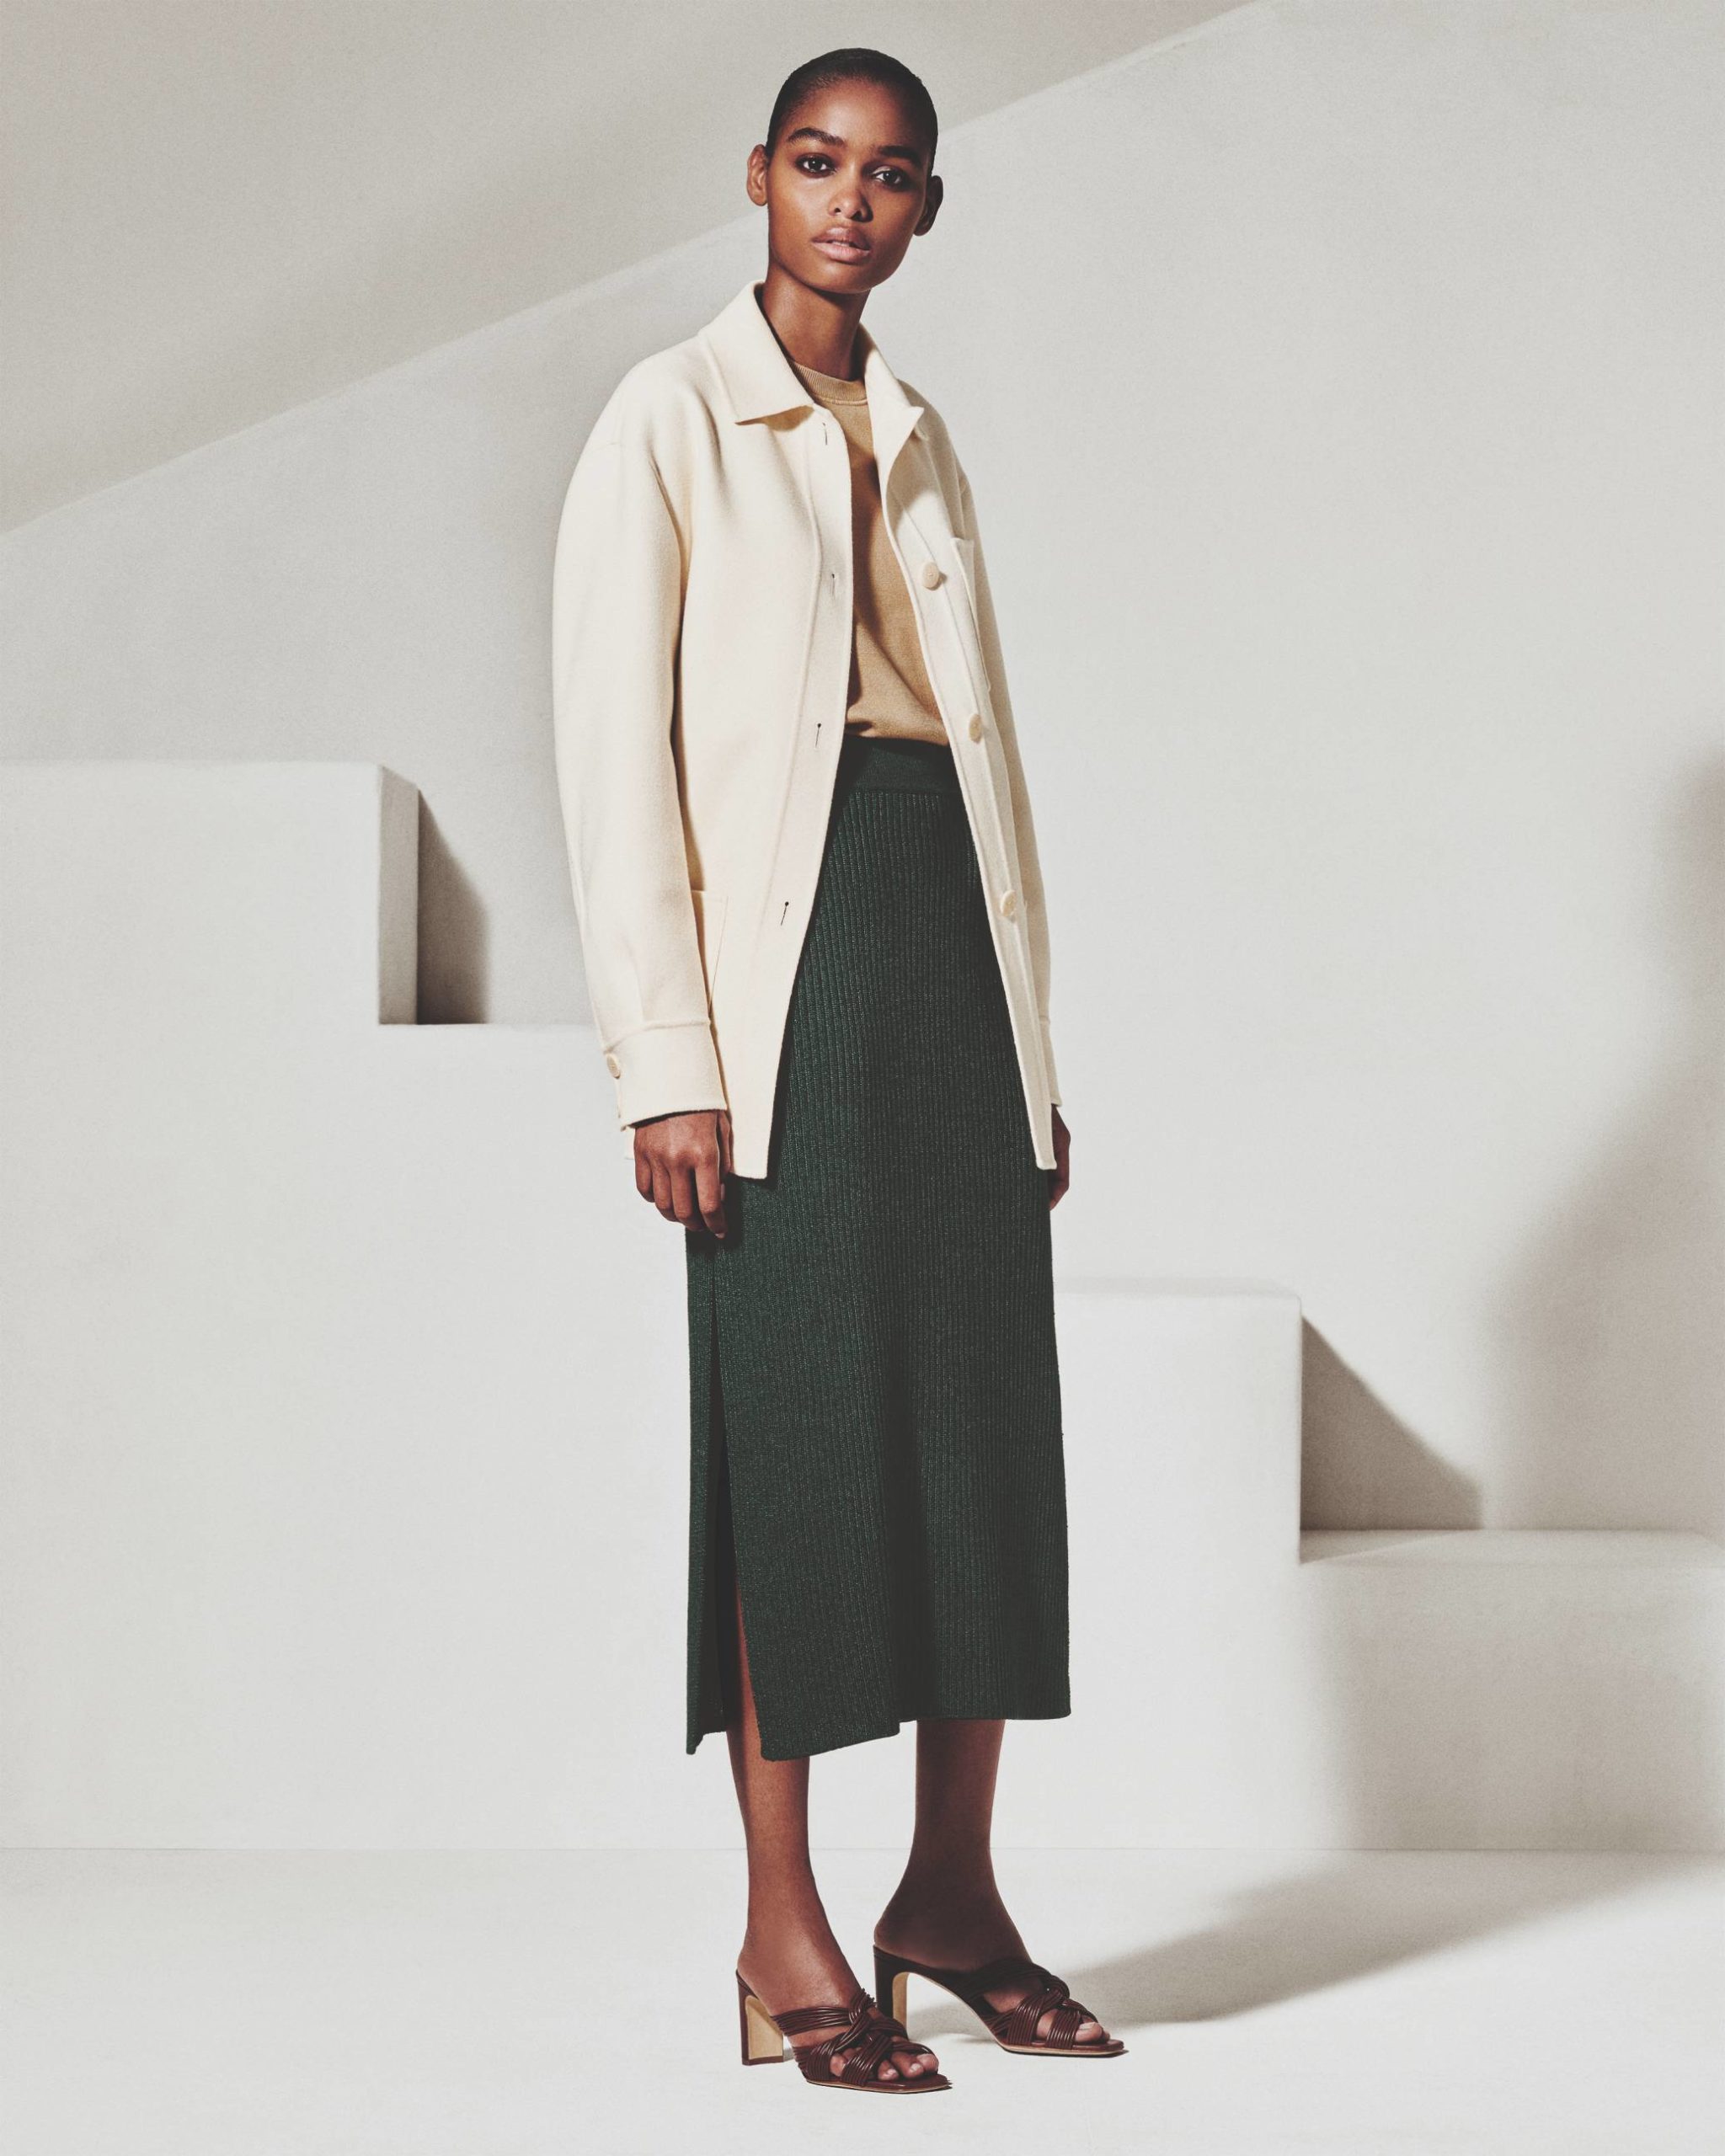 Loro Piana launches spring summer 2023 campaign captured by Inez